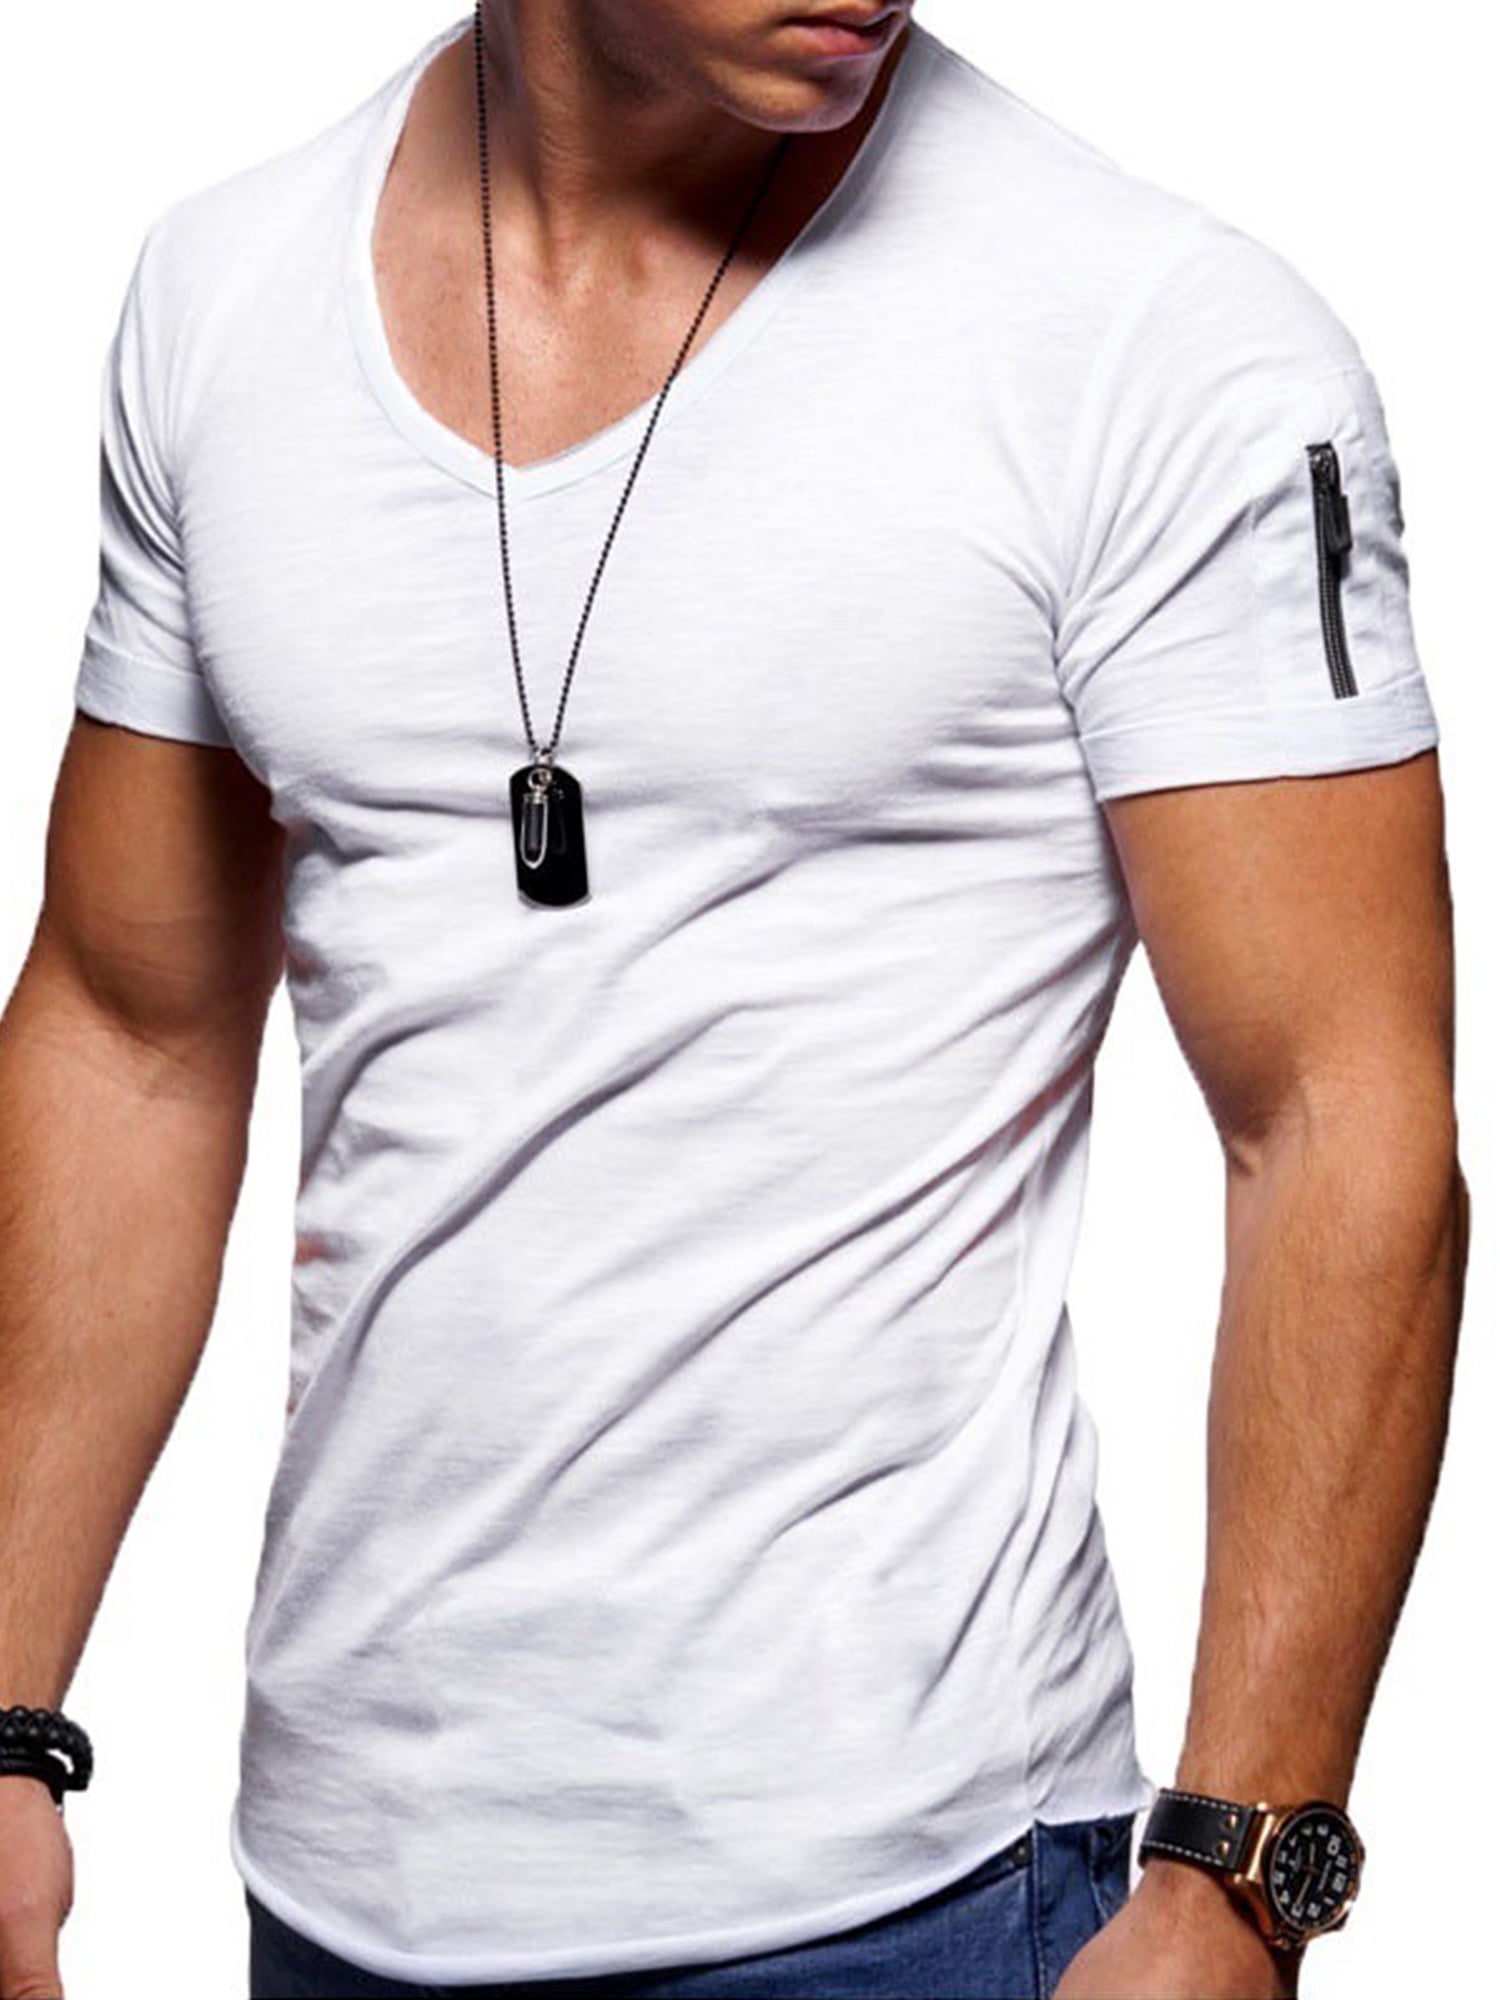 Fashion Men's Tee Shirt Slim Fit V Neck Short Sleeve Muscle Casual Tops T Shirts 